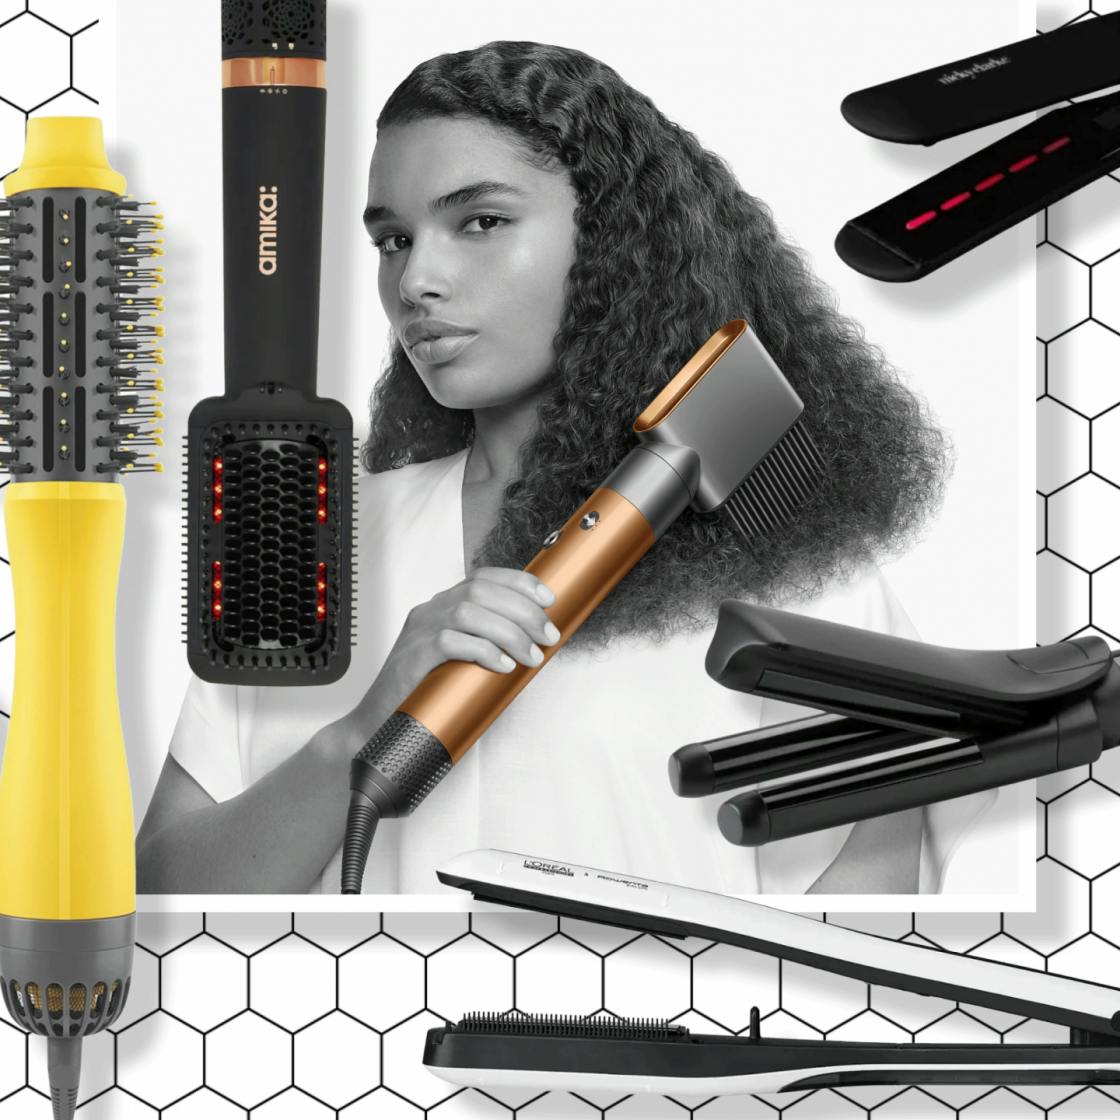 7 new heated hair tools and technology: Zuvi, Dyson, BaByliss